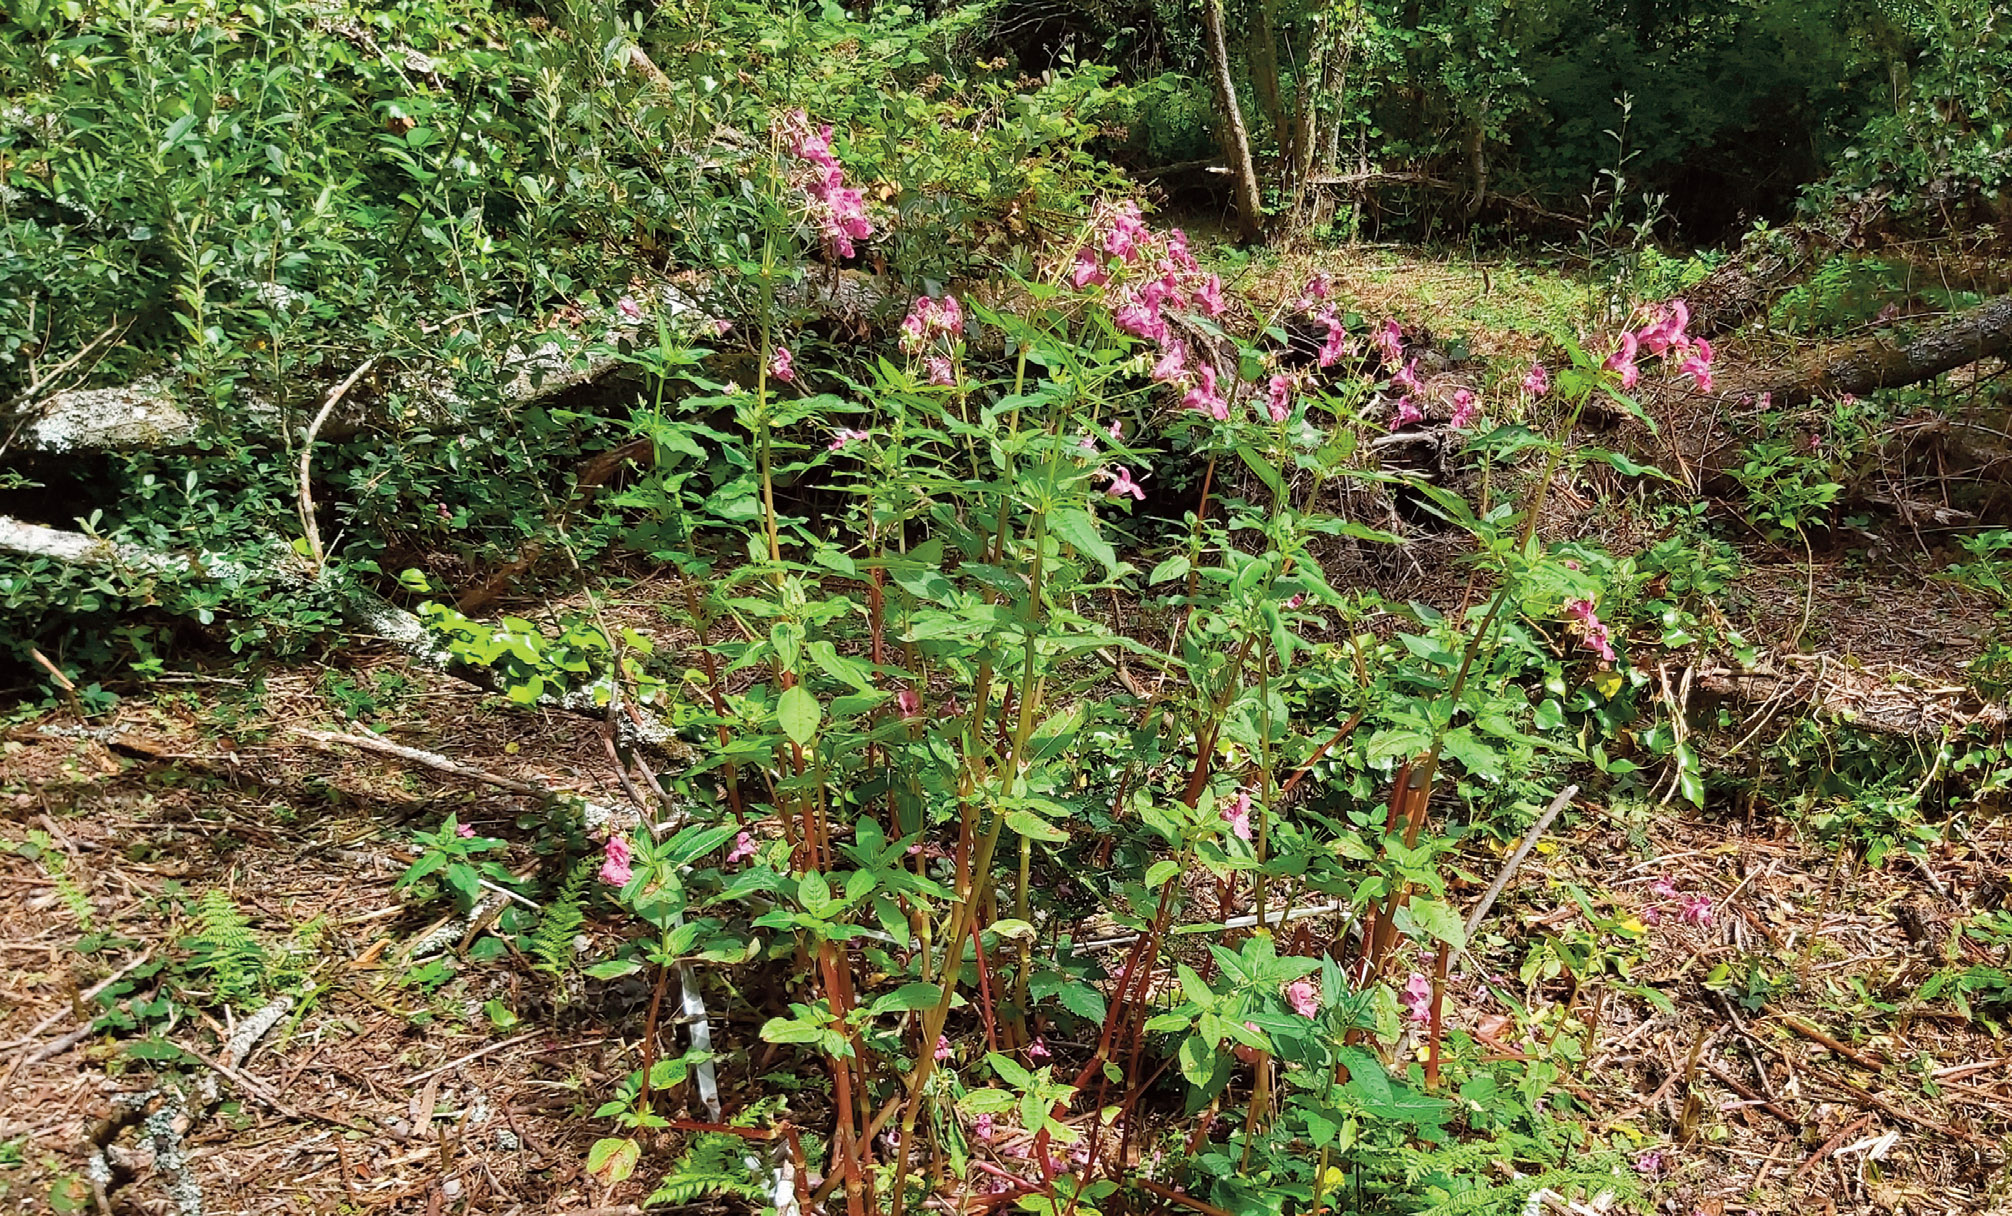 An area of Himalayan balsam is left to flower in a woodland